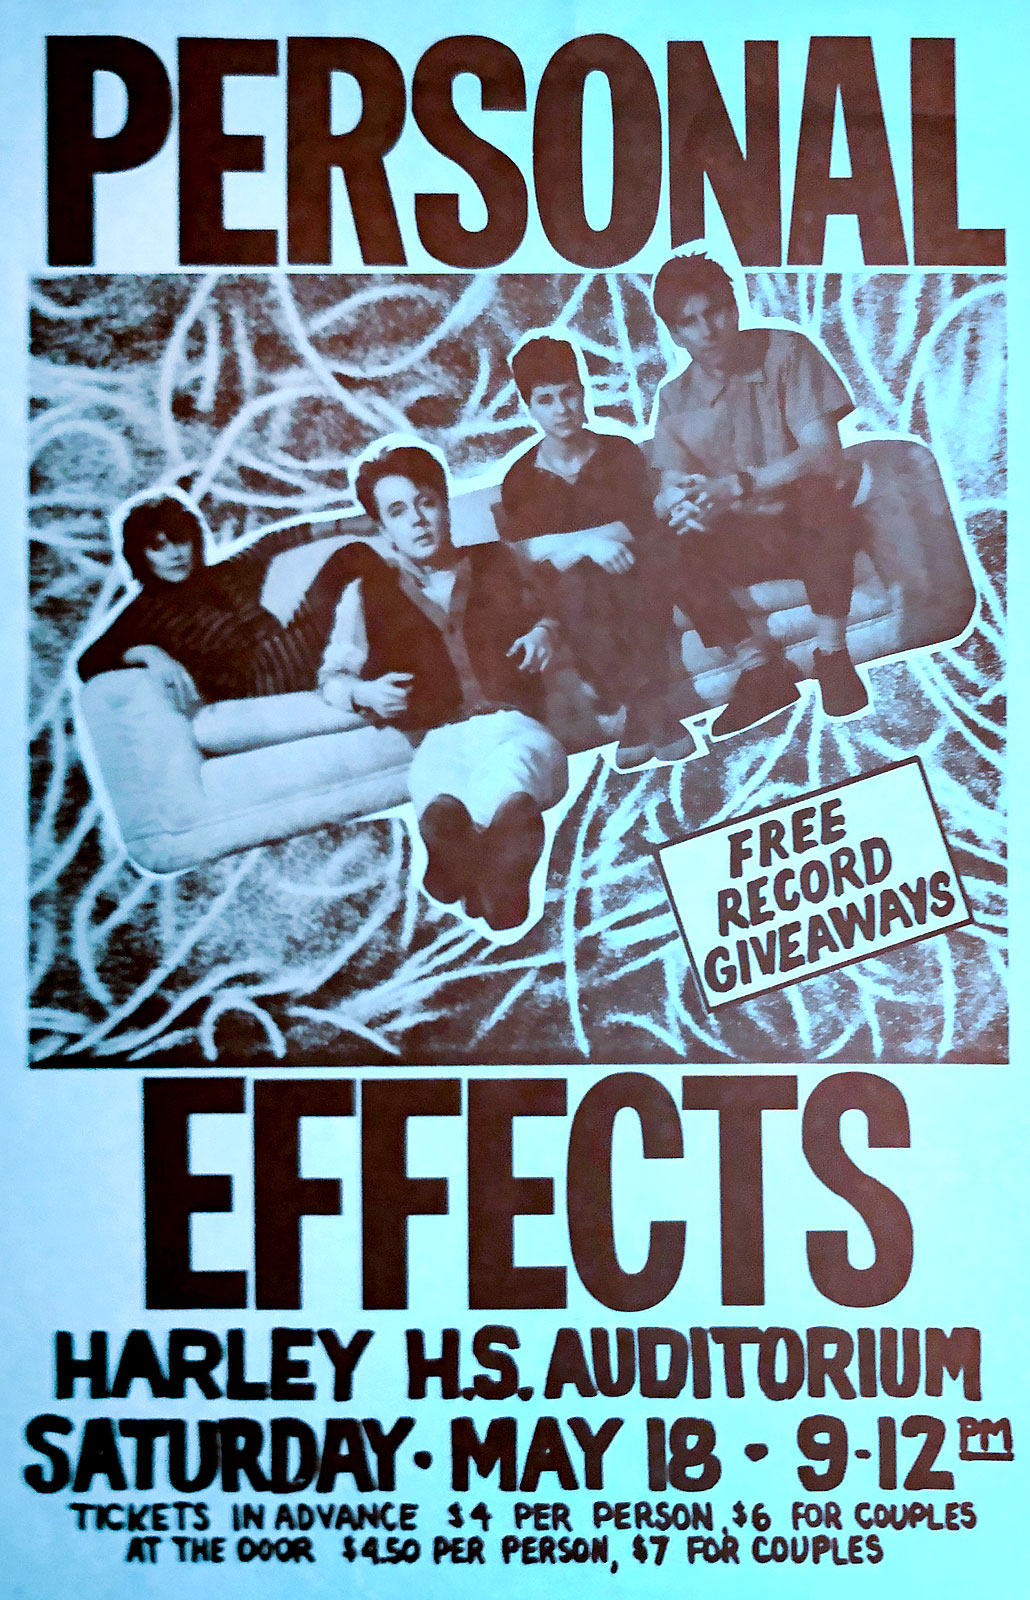 Poster for Personal Effects at Harley High School in Rochester, New York on 05.18.1985. Robin Mills Goldblatt, Personal Effects bass player, was a senior at Harley at the time.